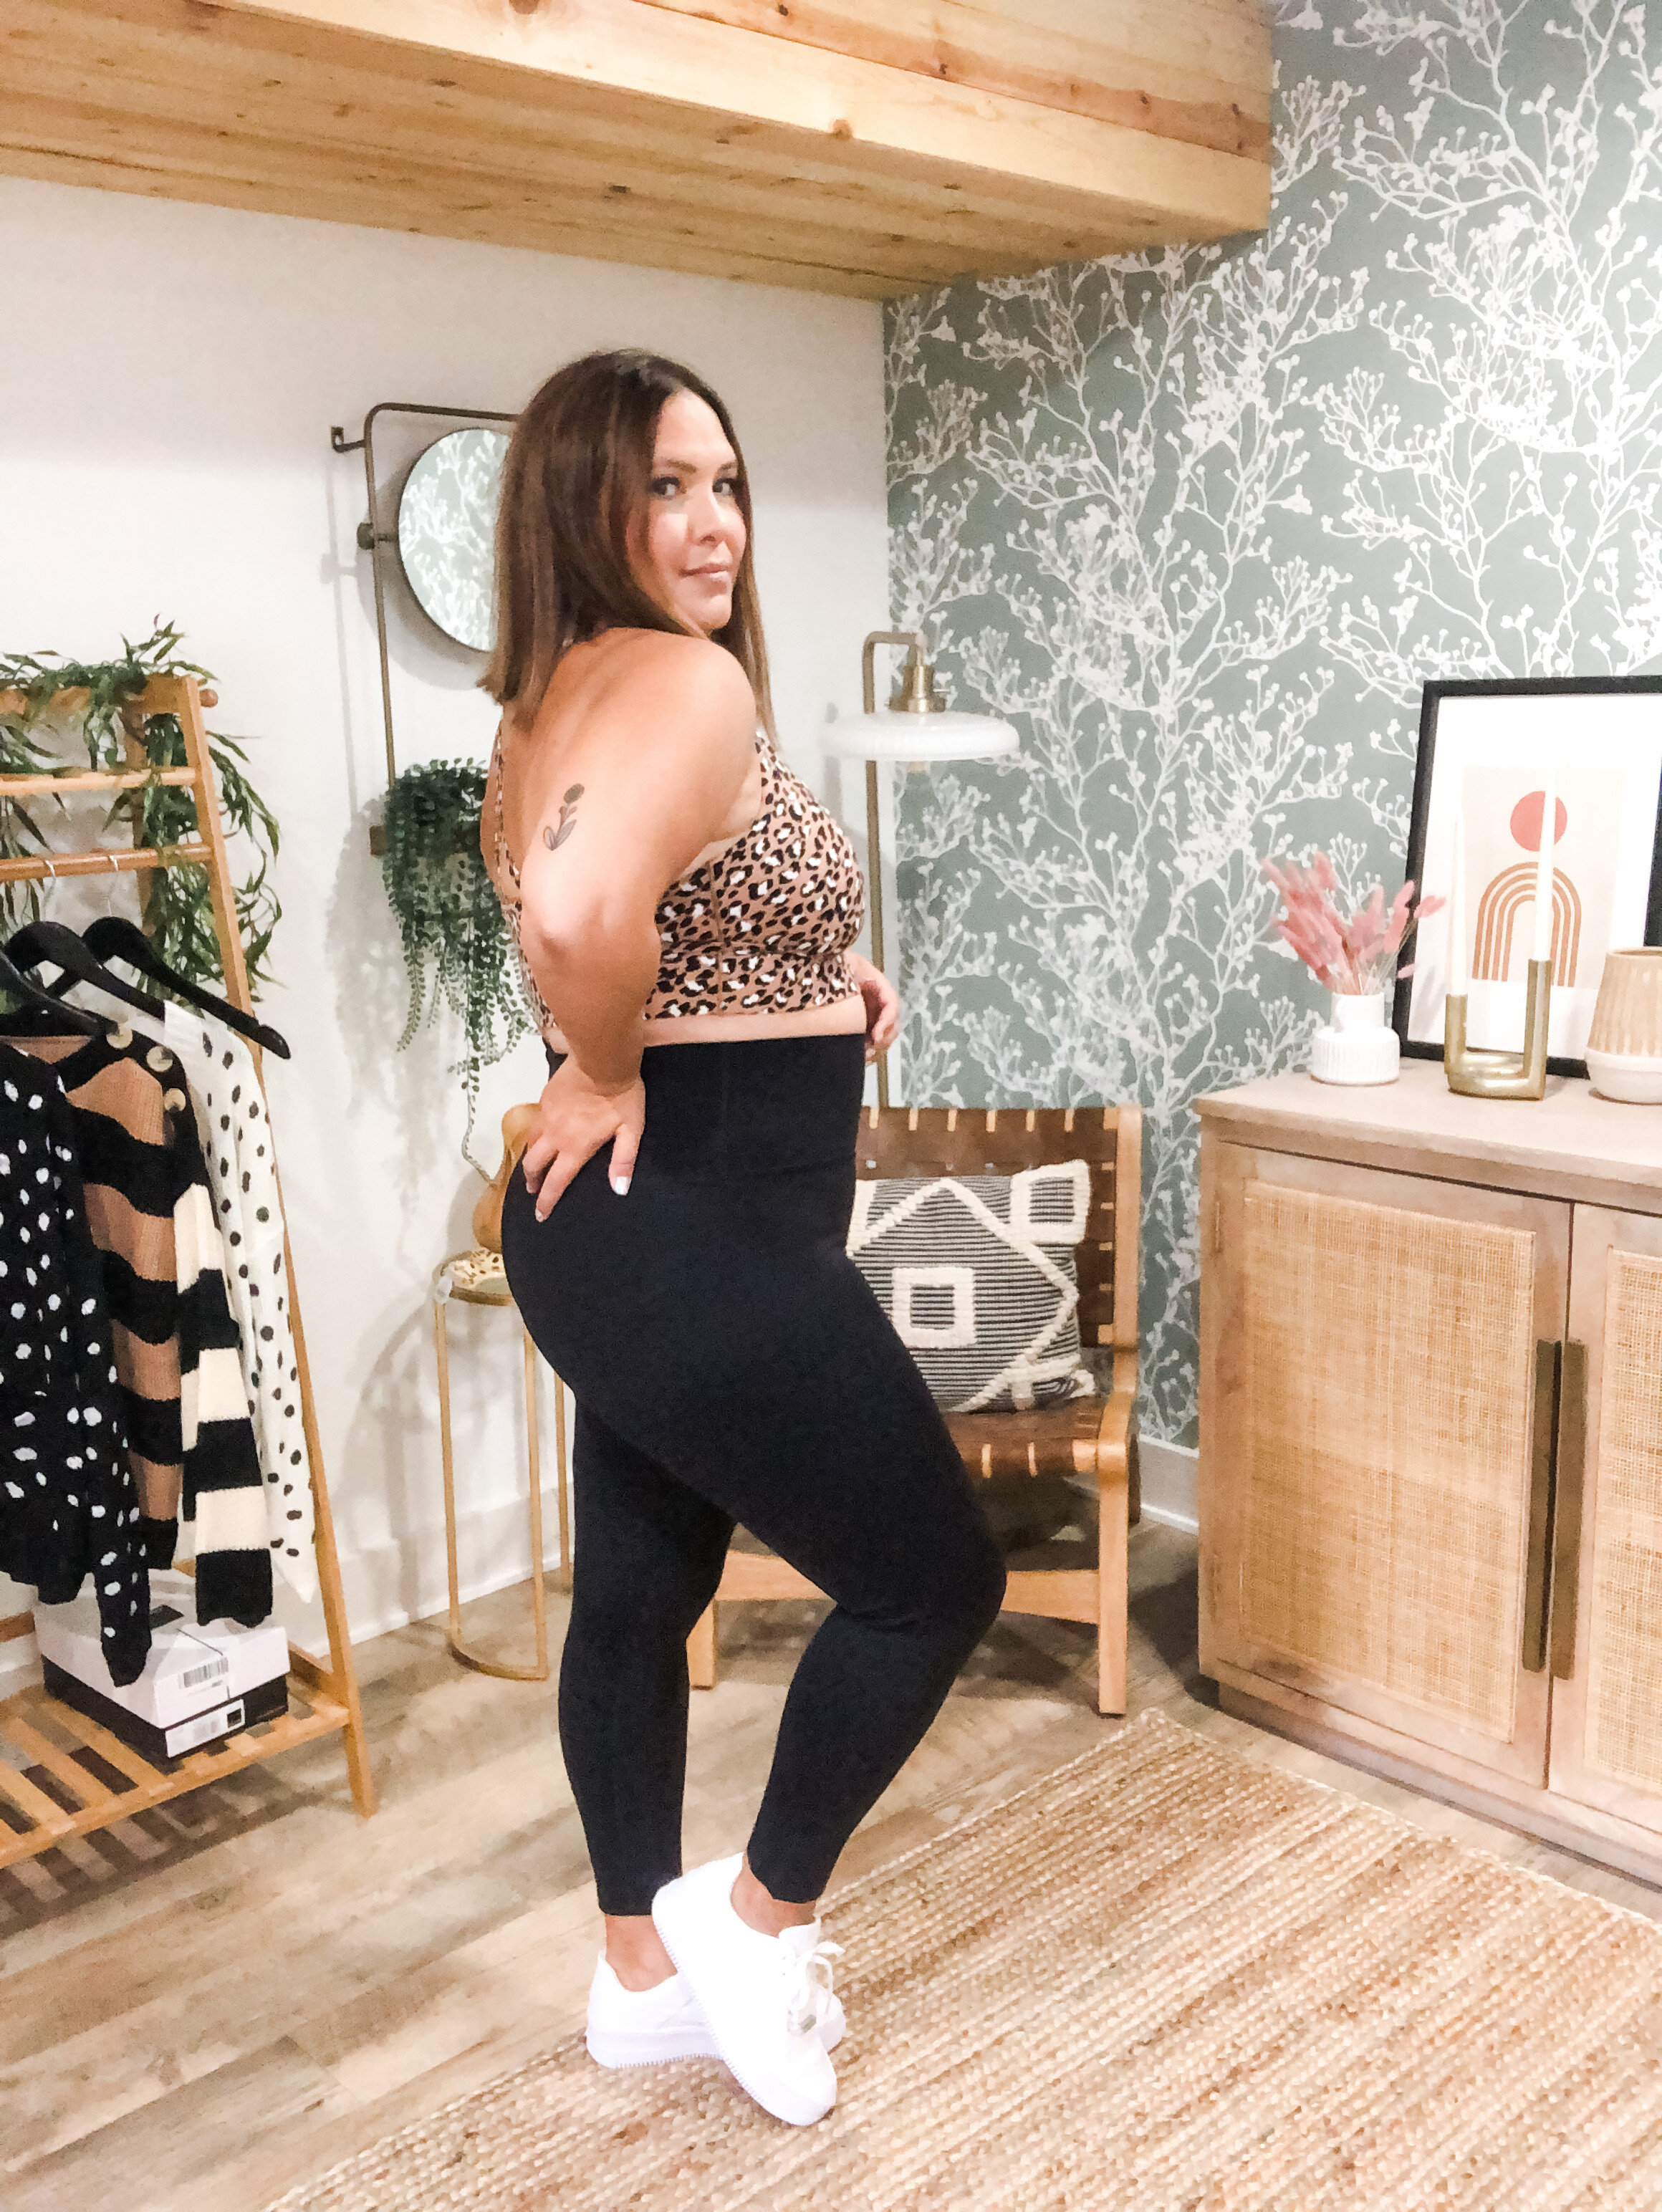 Curvy Try On Session: Aerie Offline — Mommy In Heels